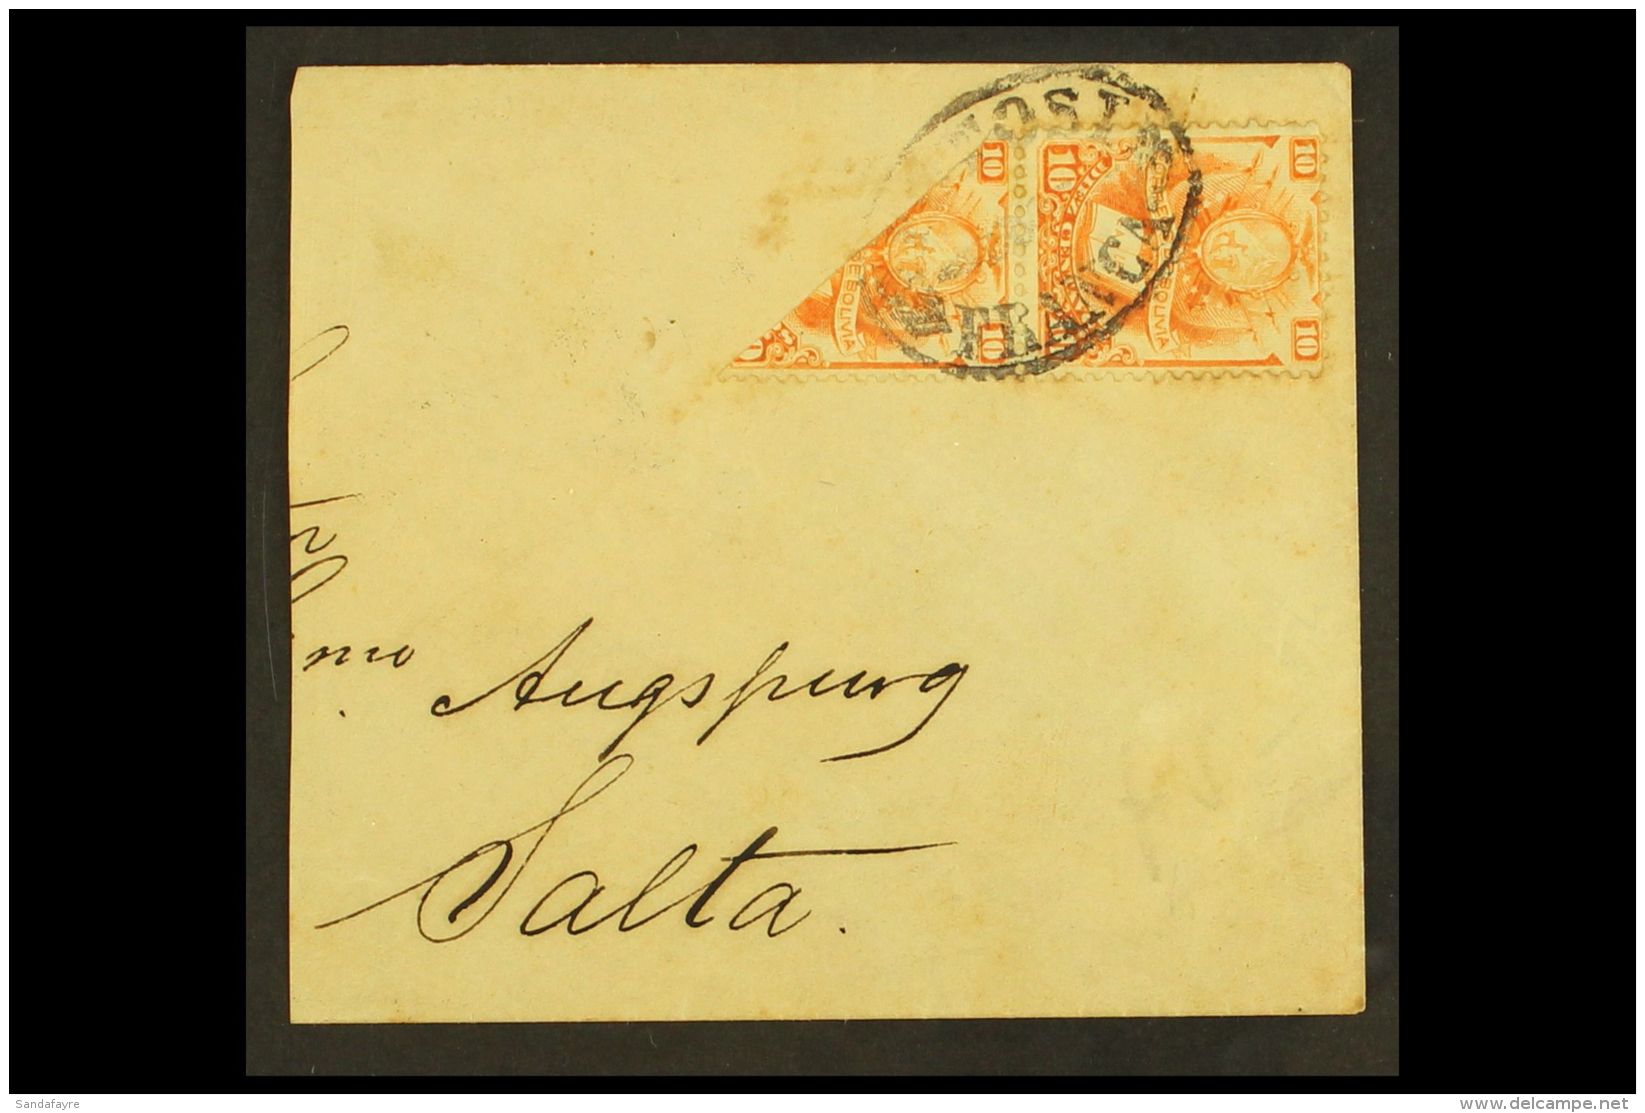 1886 BISECT Part Cover (about 1/3 Missing) Addressed To Salta, Bearing 1878 10c Orange Pair, One Bisected... - Bolivie